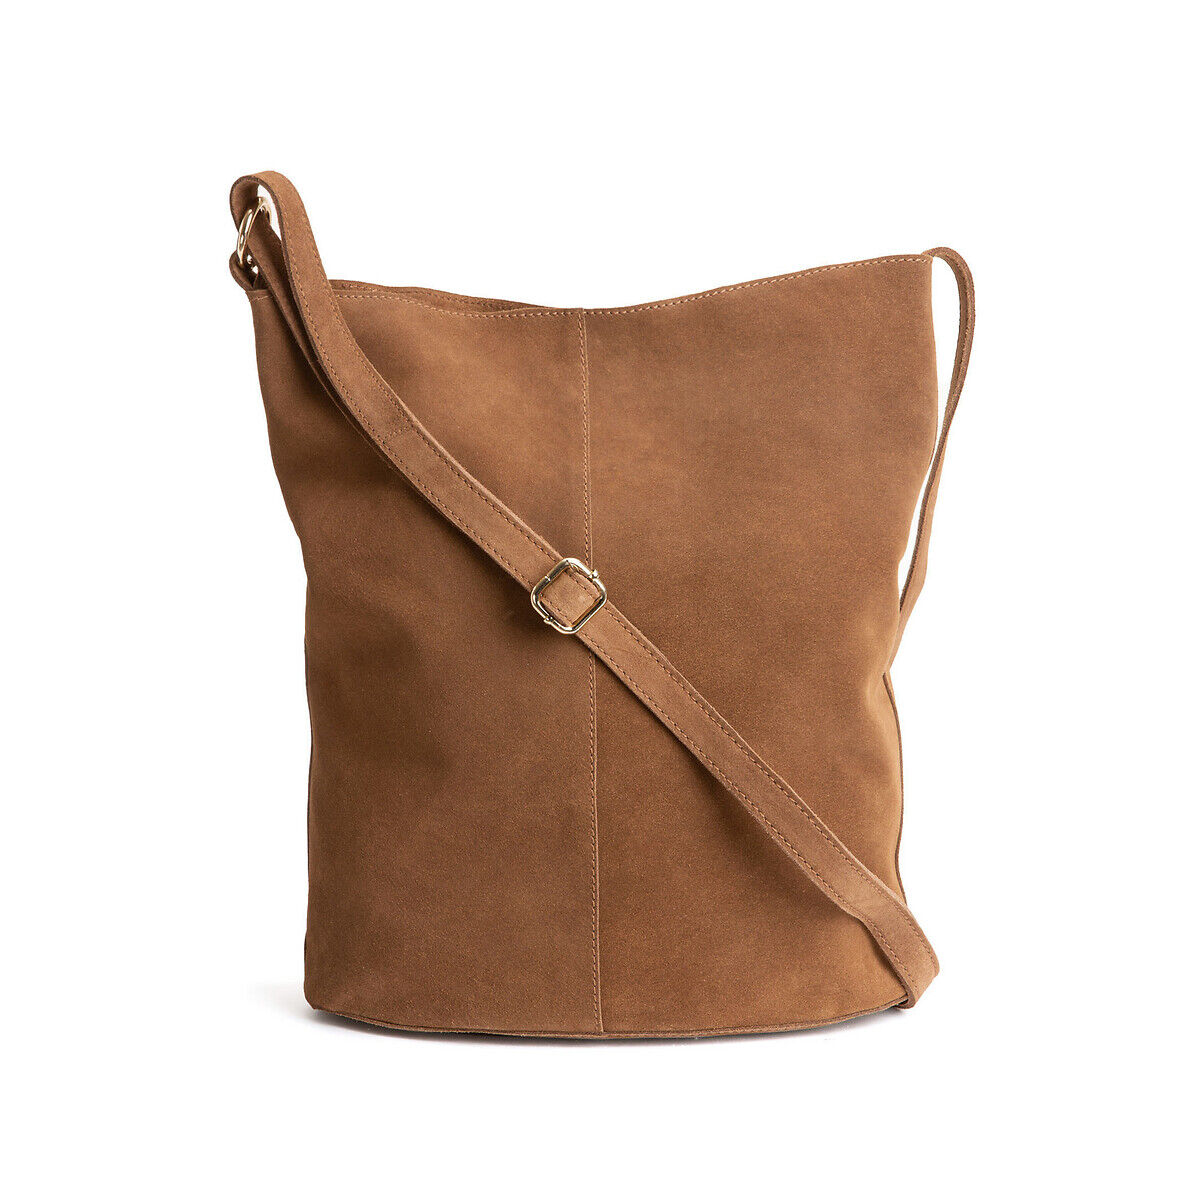 LA REDOUTE COLLECTIONS Sac hobo cuir